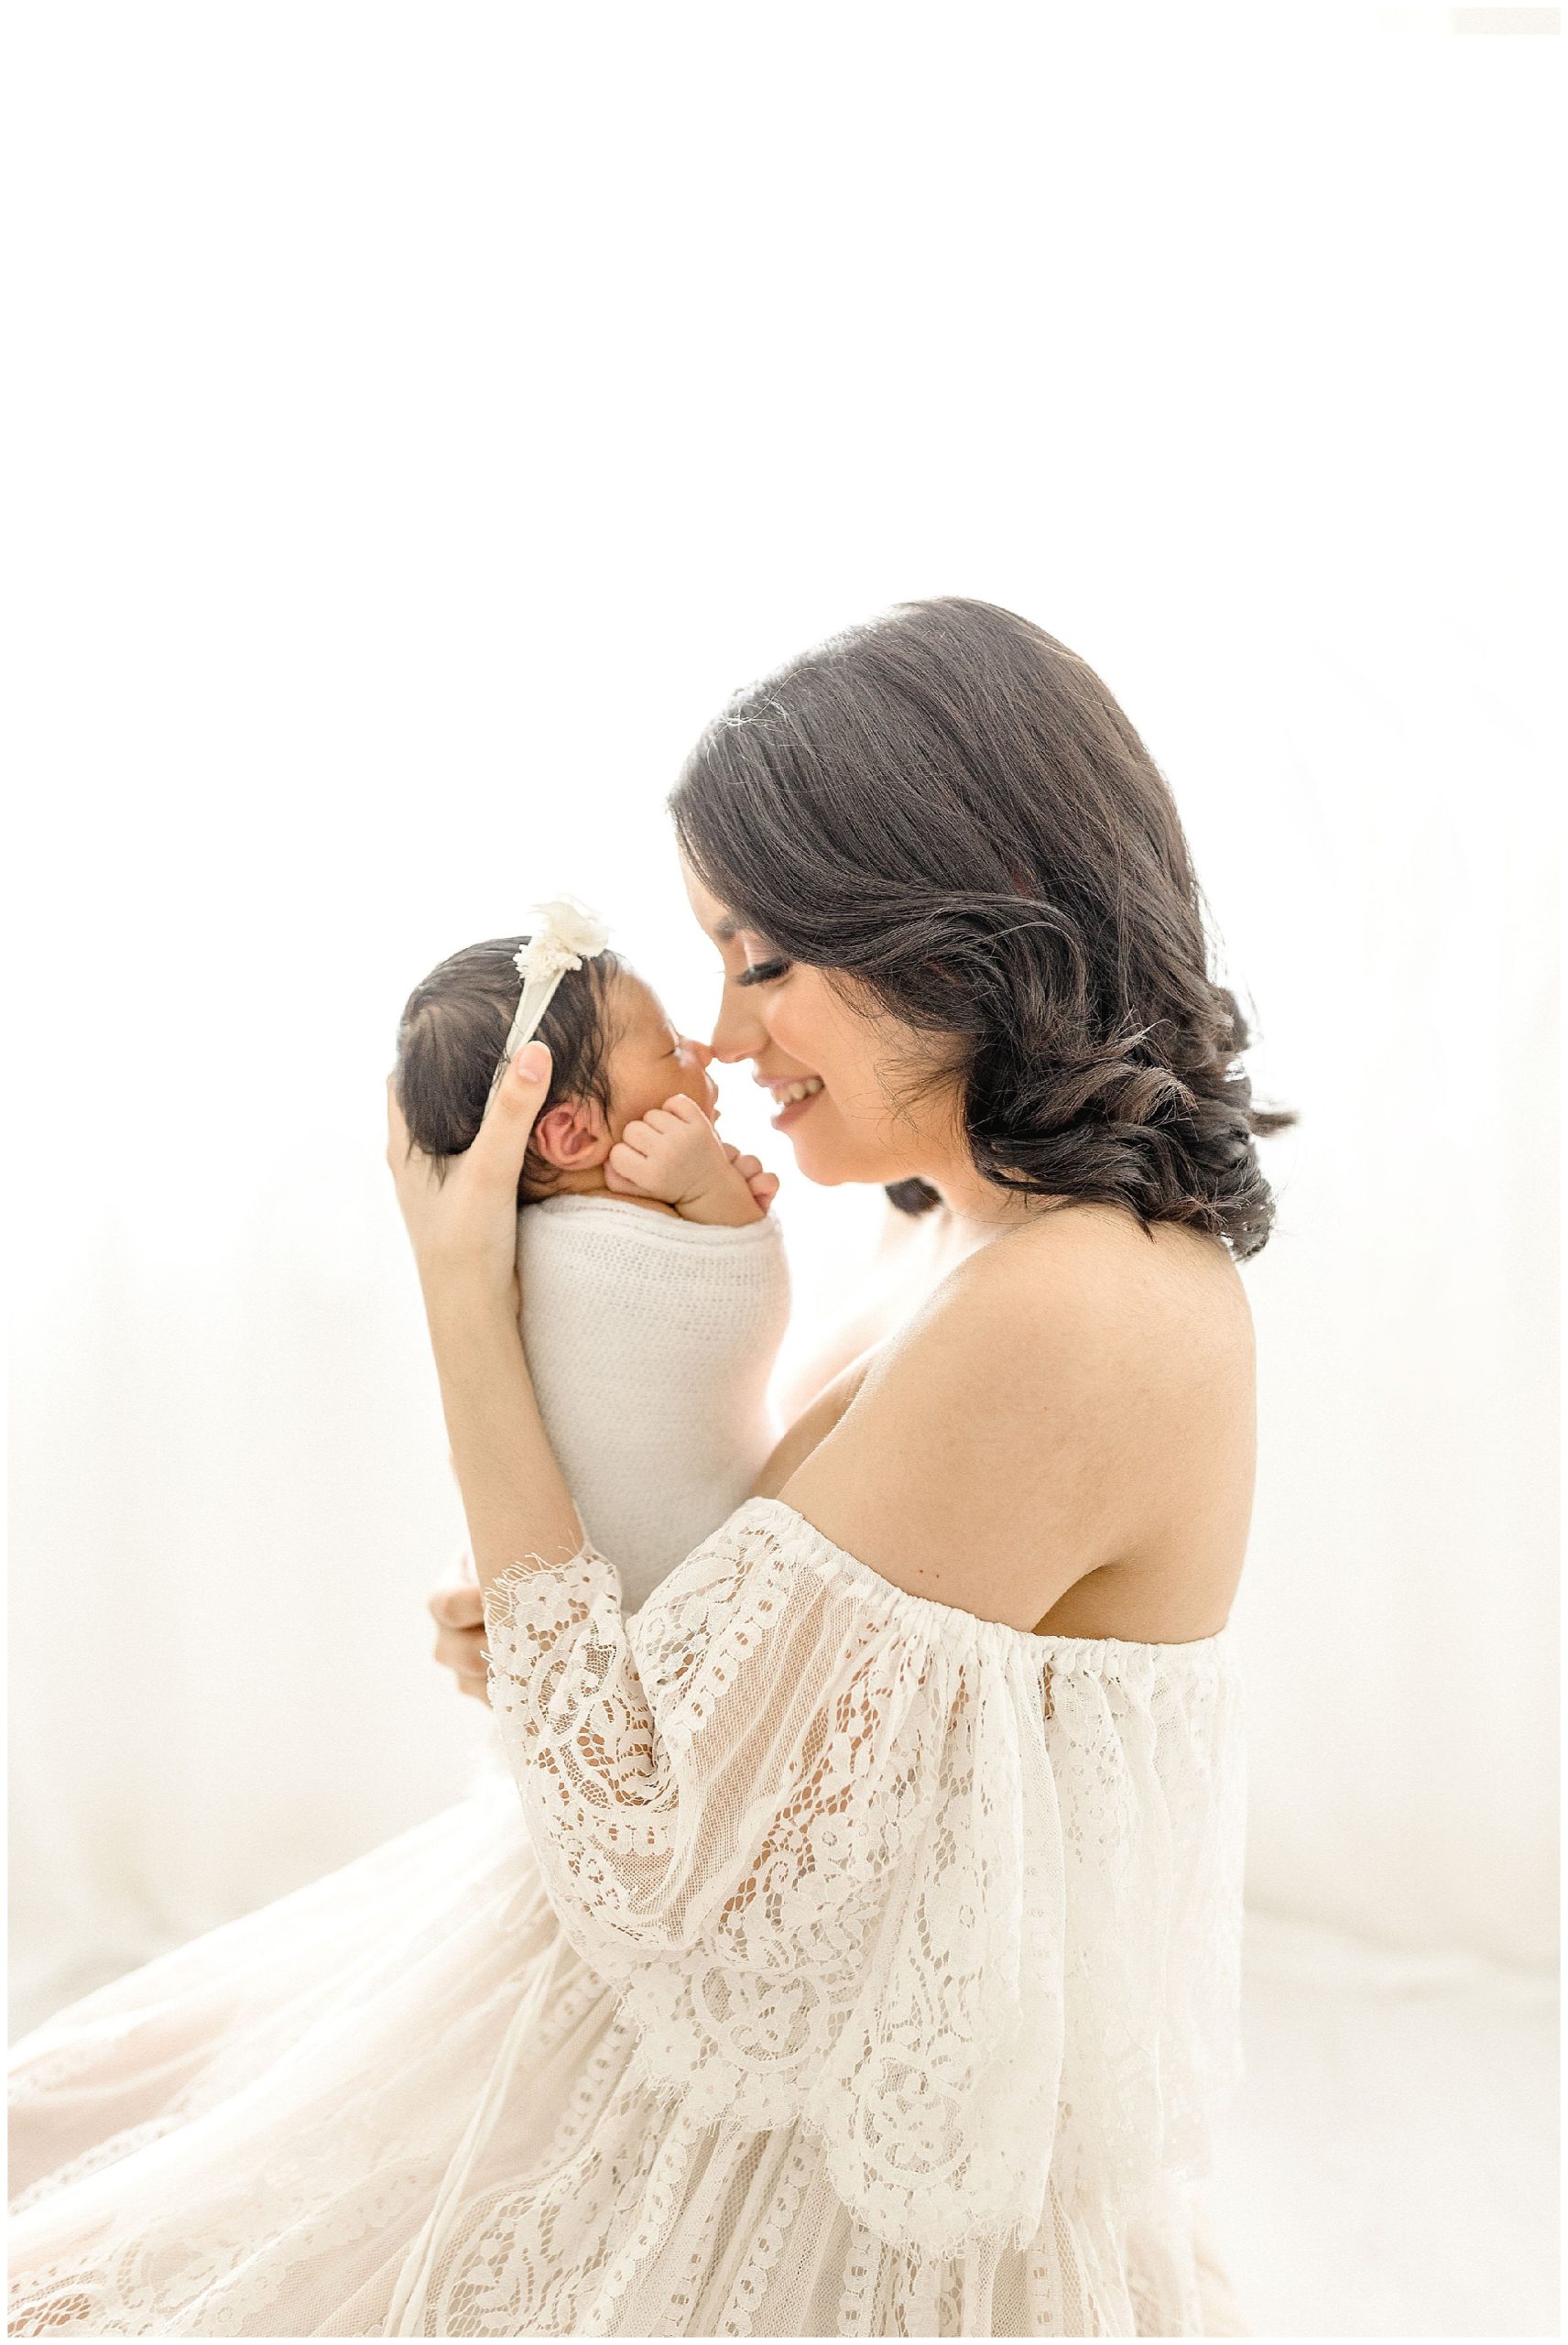 Mom nose to nose with daughter. Photo by Ivanna Vidal Photography.